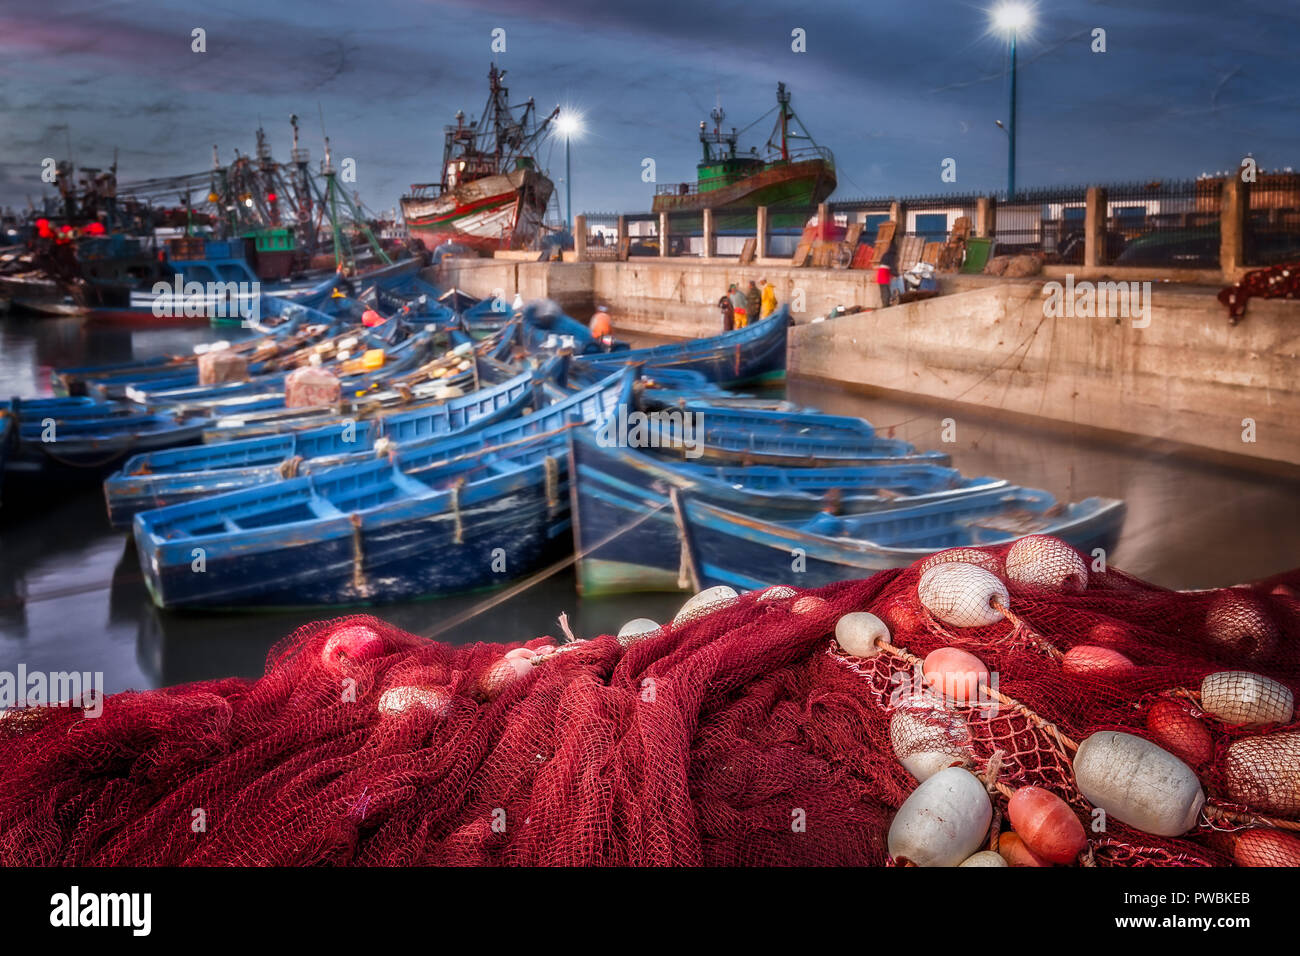 Morocco Essaouira harbor at night. Selective focus on the foreground red fish netting and floats. Background motion blur of blue boats and seagulls. Stock Photo